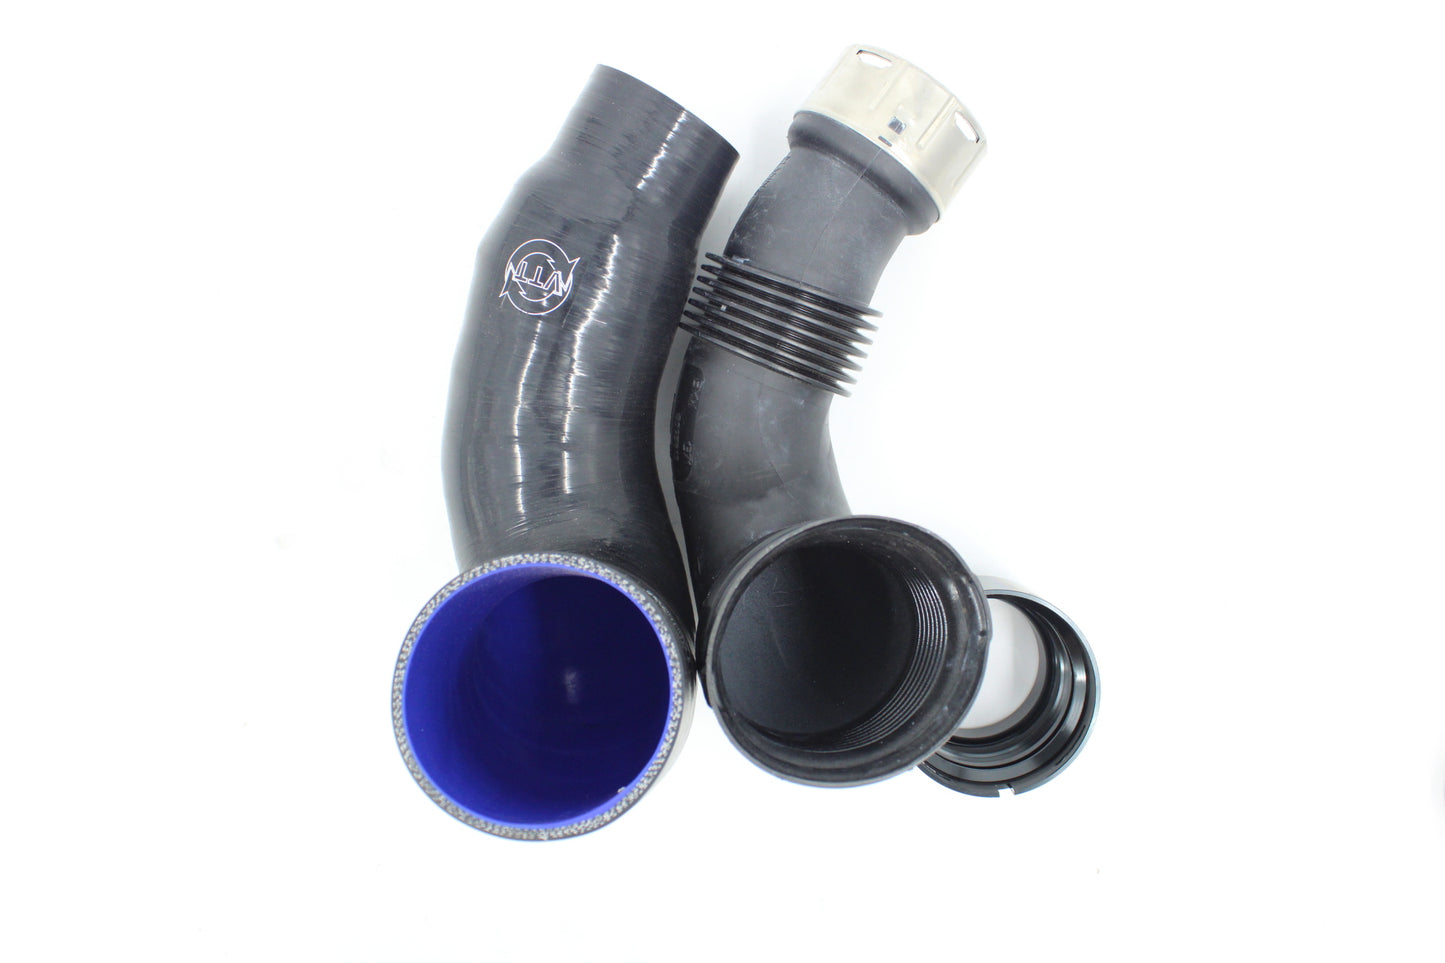 VTT - Silicone inlet Pipes || G8X M3/M4